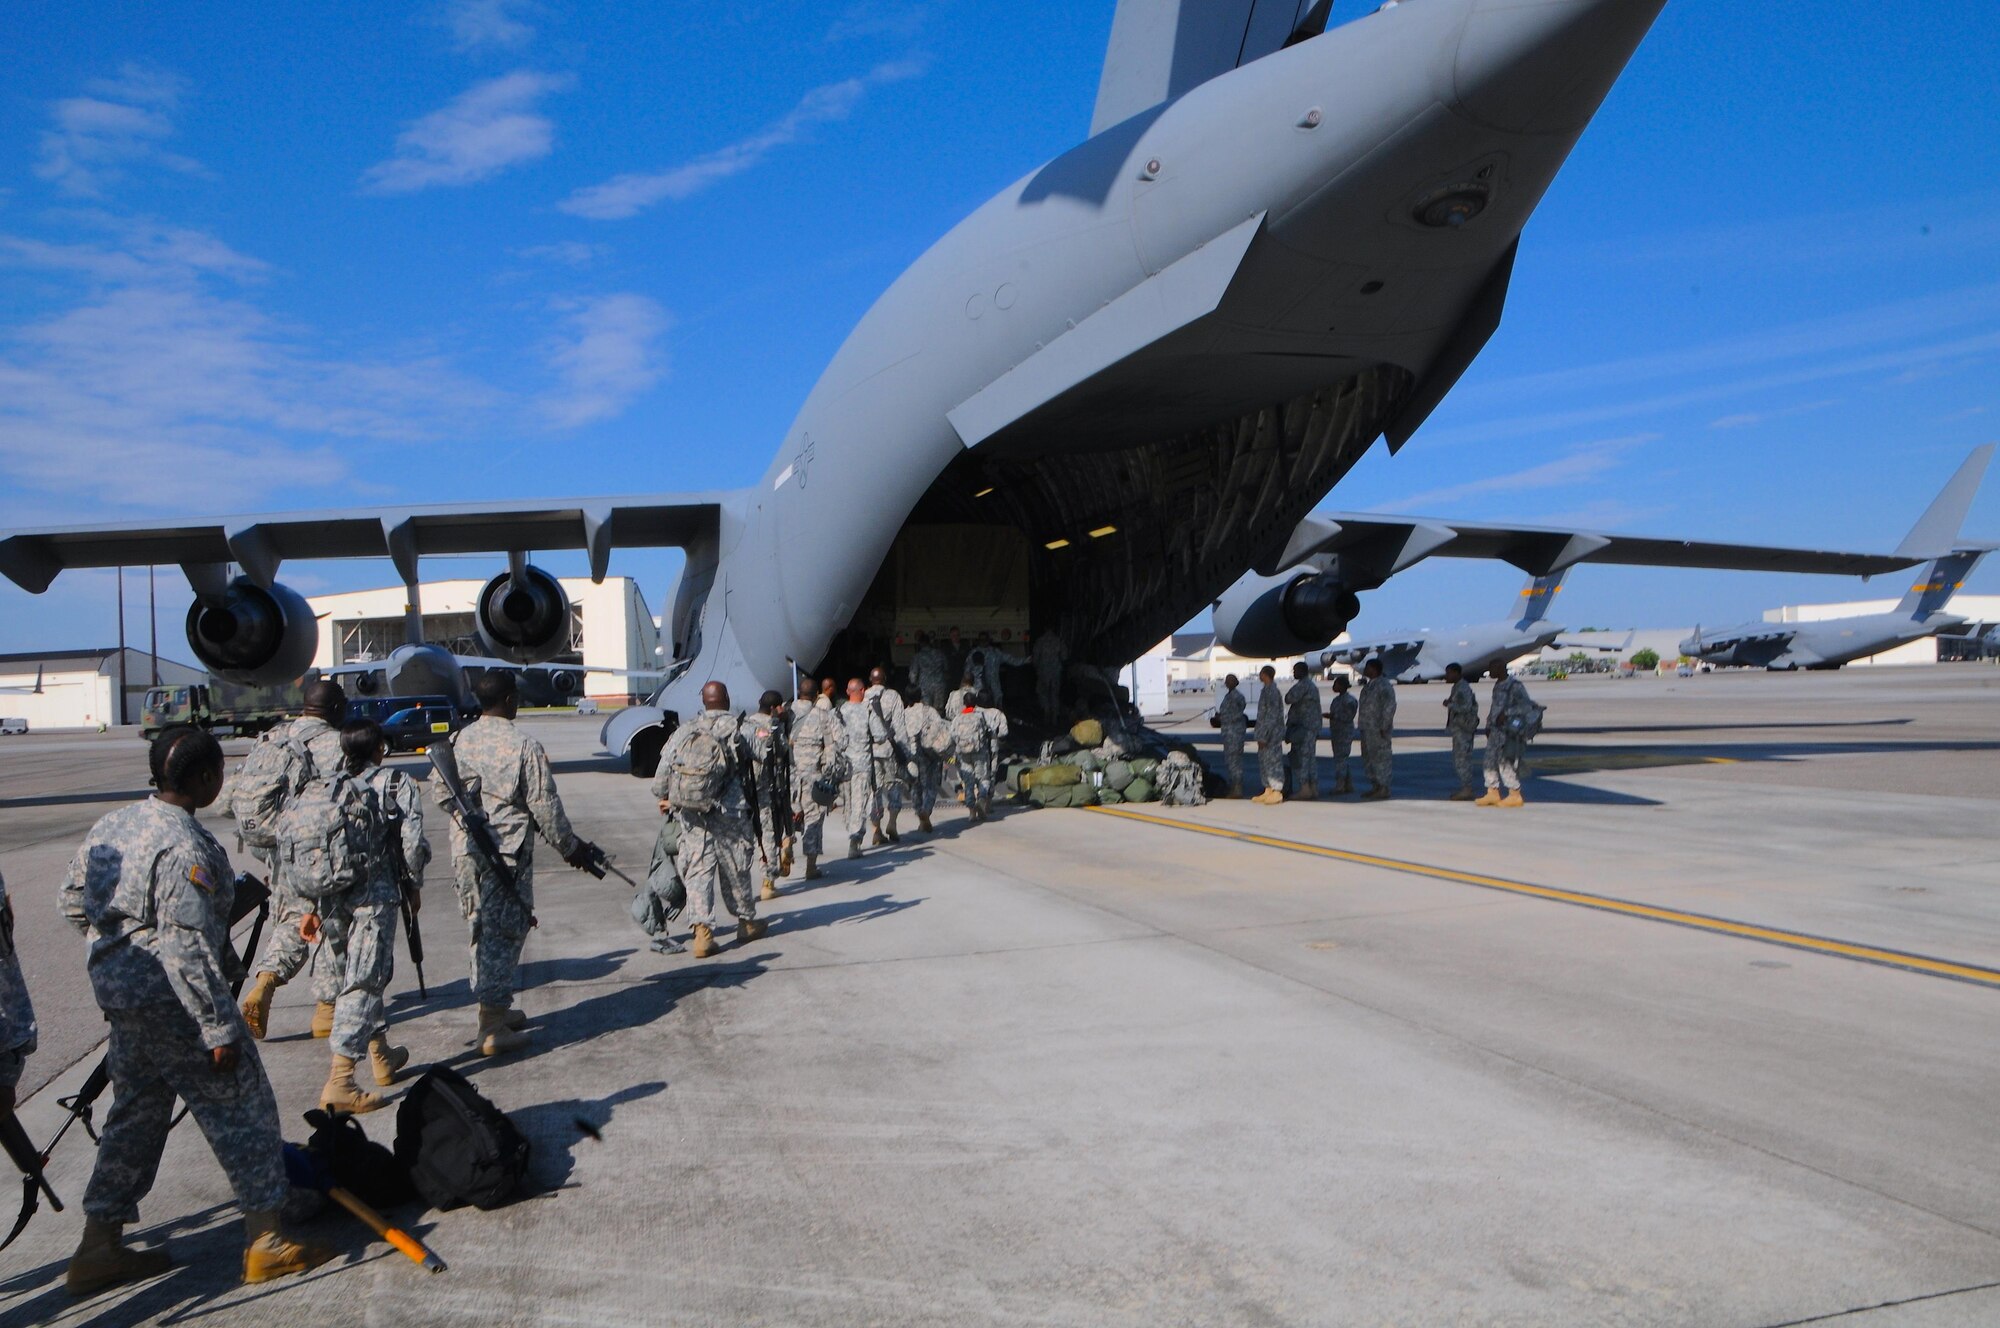 Soldiers of the 414th Chemical Brigade load an Air Force Reserve Boeing C-17 Globe master III of the 315th Air Wing in Charleston, S.C., for transport to Fort McCoy, WI on Aug. 15, 2015, in support of Operation Red Dragon. Red Dragon is a Civil Defense readiness exercise, which incorporates Army Reserve and National Guard Soldiers with civilian first responder agencies such as fire departments, police departments and hospitals to improve capabilities in large-scale chemical defense operations. (U.S. Army photo by Sgt. Eben Boothby)